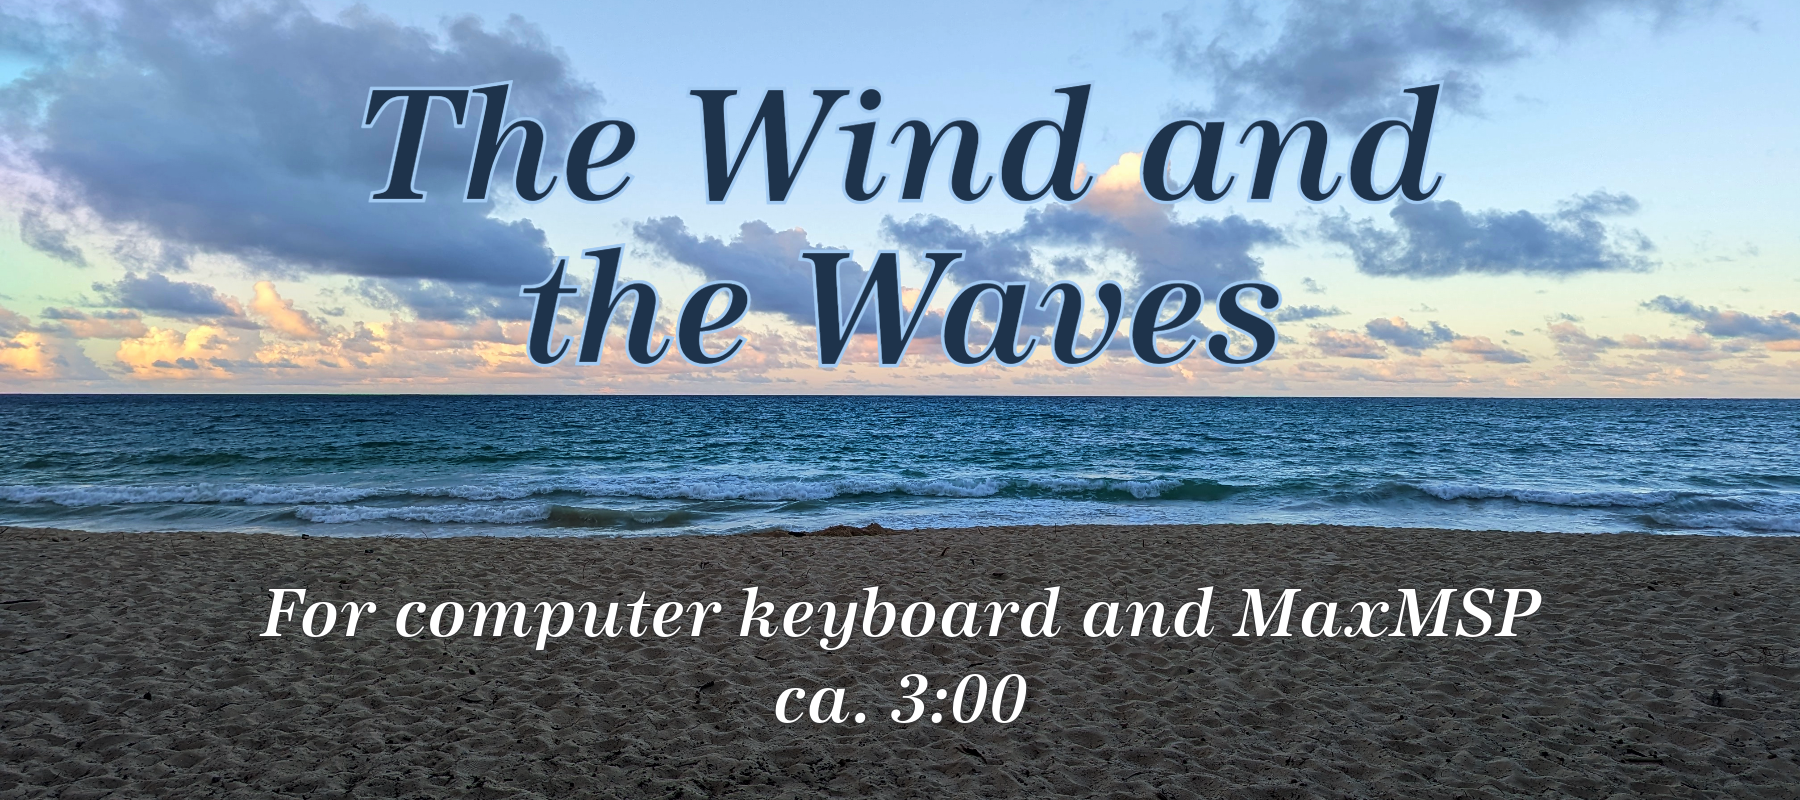 The Wind and the Waves, for computer keyboard and MaxMSP, ca. 3:00